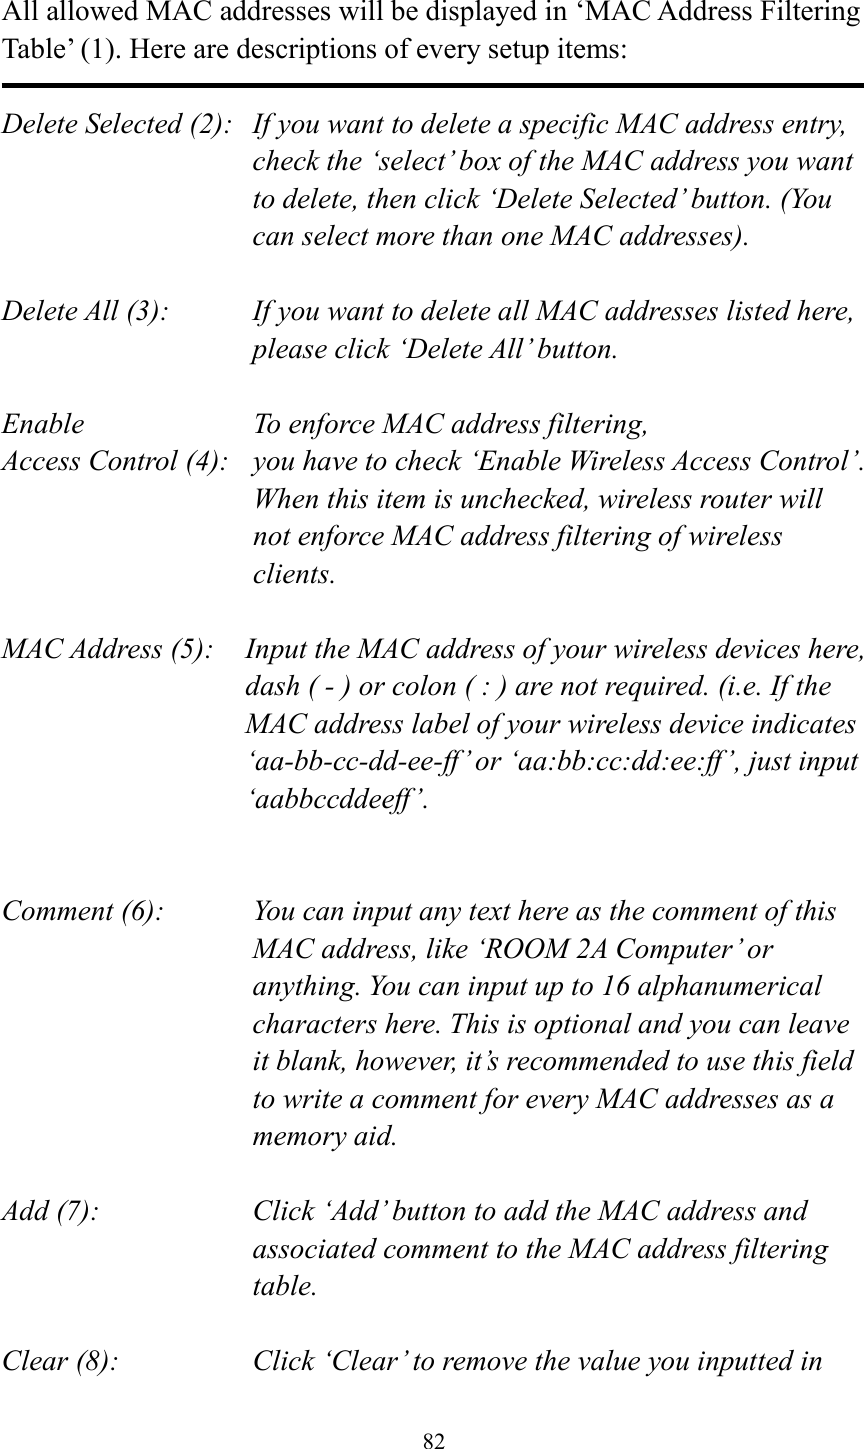 82  All allowed MAC addresses will be displayed in ‘MAC Address Filtering Table’ (1). Here are descriptions of every setup items:  Delete Selected (2):   If you want to delete a specific MAC address entry, check the ‘select’ box of the MAC address you want to delete, then click ‘Delete Selected’ button. (You can select more than one MAC addresses).  Delete All (3):    If you want to delete all MAC addresses listed here, please click ‘Delete All’ button.  Enable      To enforce MAC address filtering, Access Control (4):   you have to check ‘Enable Wireless Access Control’. When this item is unchecked, wireless router will not enforce MAC address filtering of wireless clients.  MAC Address (5):    Input the MAC address of your wireless devices here, dash ( - ) or colon ( : ) are not required. (i.e. If the MAC address label of your wireless device indicates ‘aa-bb-cc-dd-ee-ff ’ or ‘aa:bb:cc:dd:ee:ff ’, just input ‘aabbccddeeff’.   Comment (6):      You can input any text here as the comment of this       MAC address, like ‘ROOM 2A Computer’ or         anything. You can input up to 16 alphanumerical   characters here. This is optional and you can leave   it blank, however, it’s recommended to use this field   to write a comment for every MAC addresses as a   memory aid.  Add (7):    Click ‘Add’ button to add the MAC address and associated comment to the MAC address filtering table.  Clear (8):    Click ‘Clear’ to remove the value you inputted in 